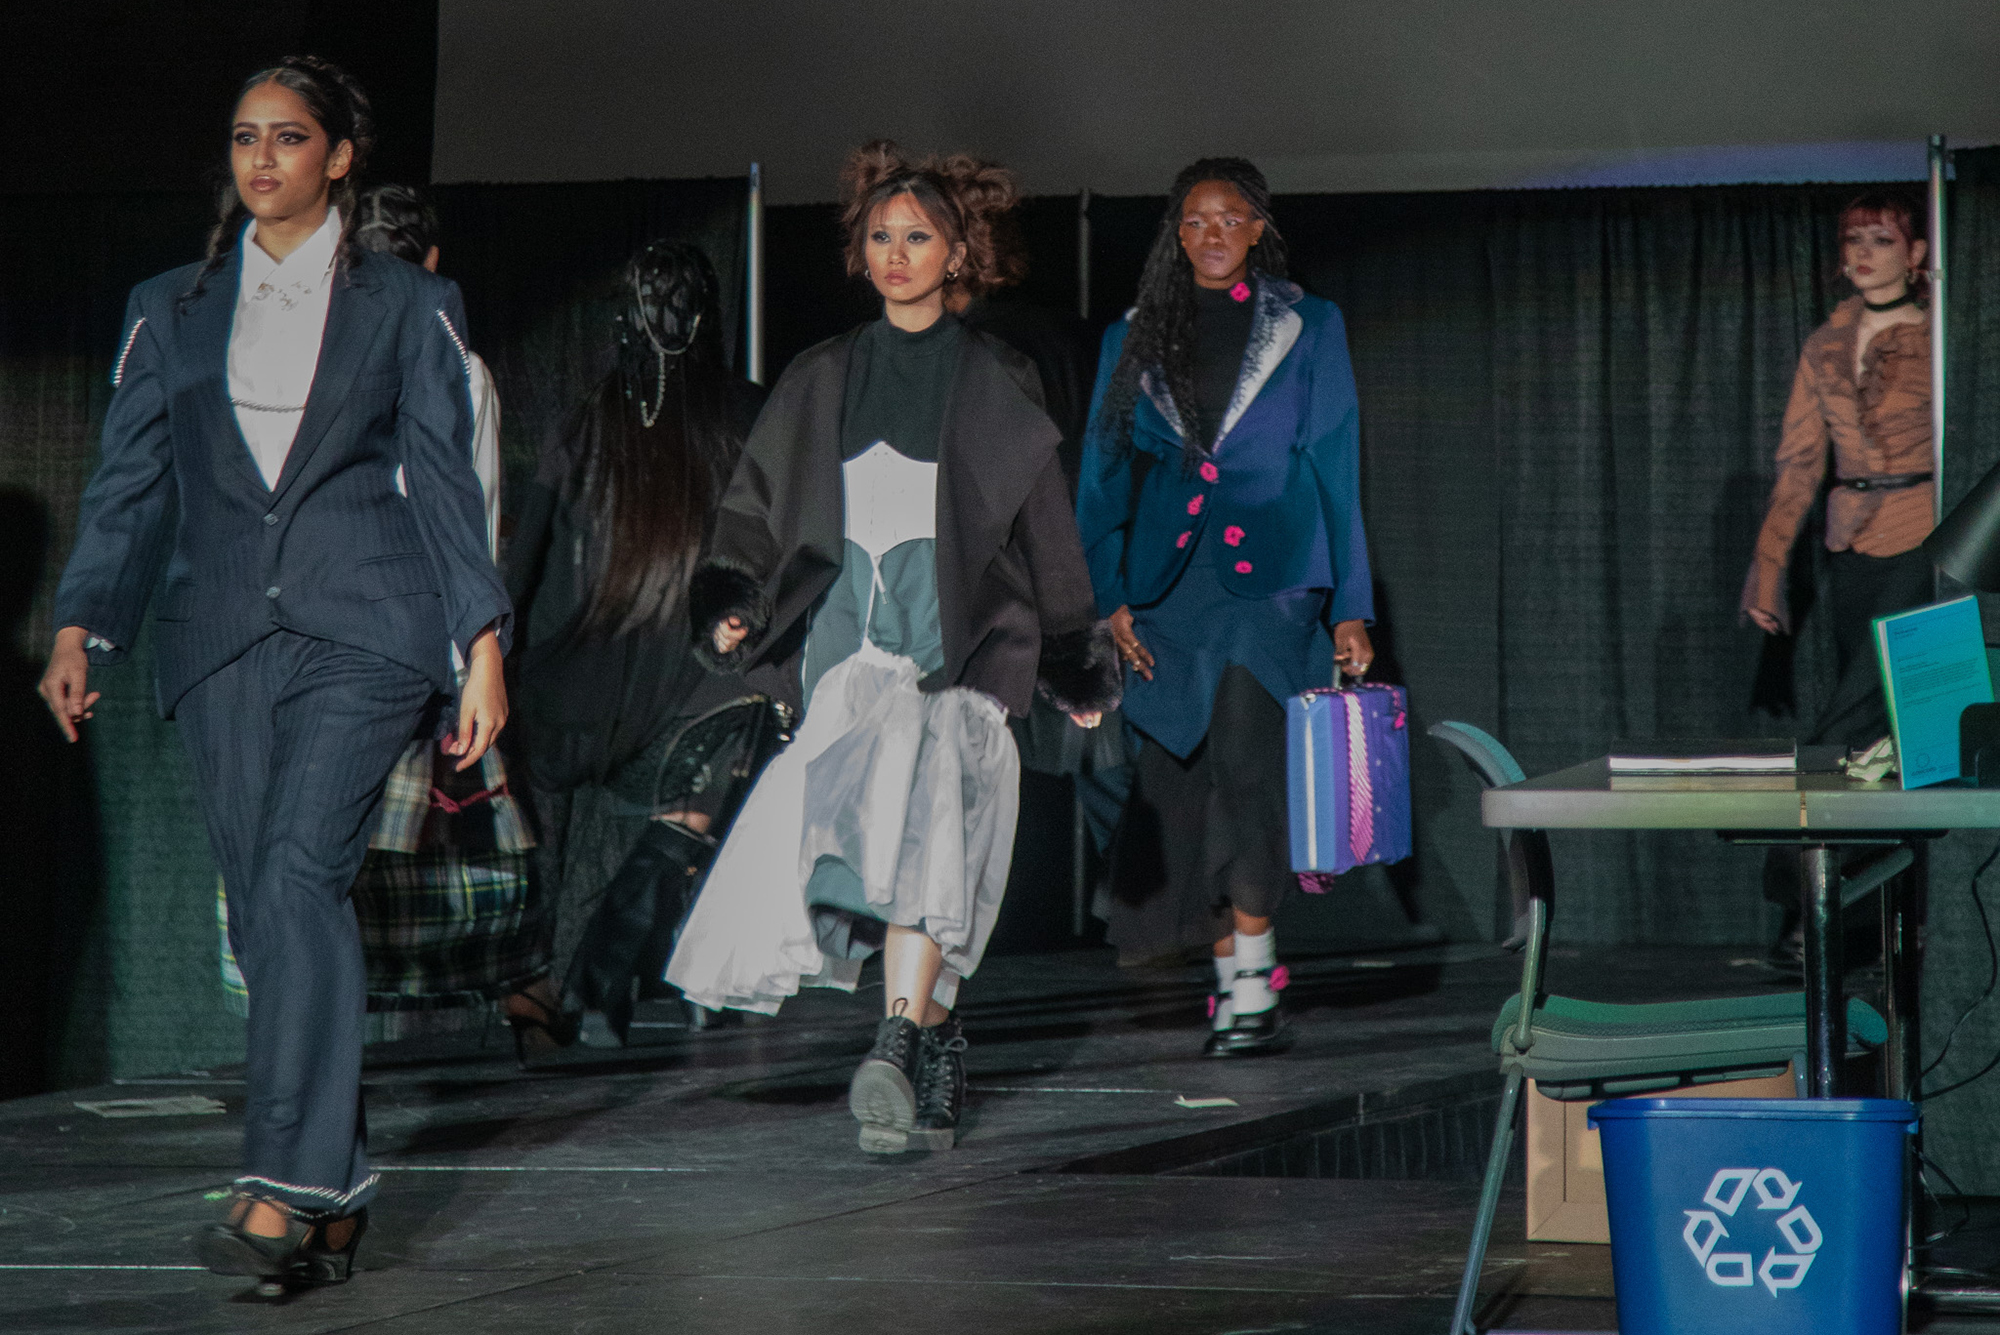 Photo: A picture of students walking a runway in eccentric clothing